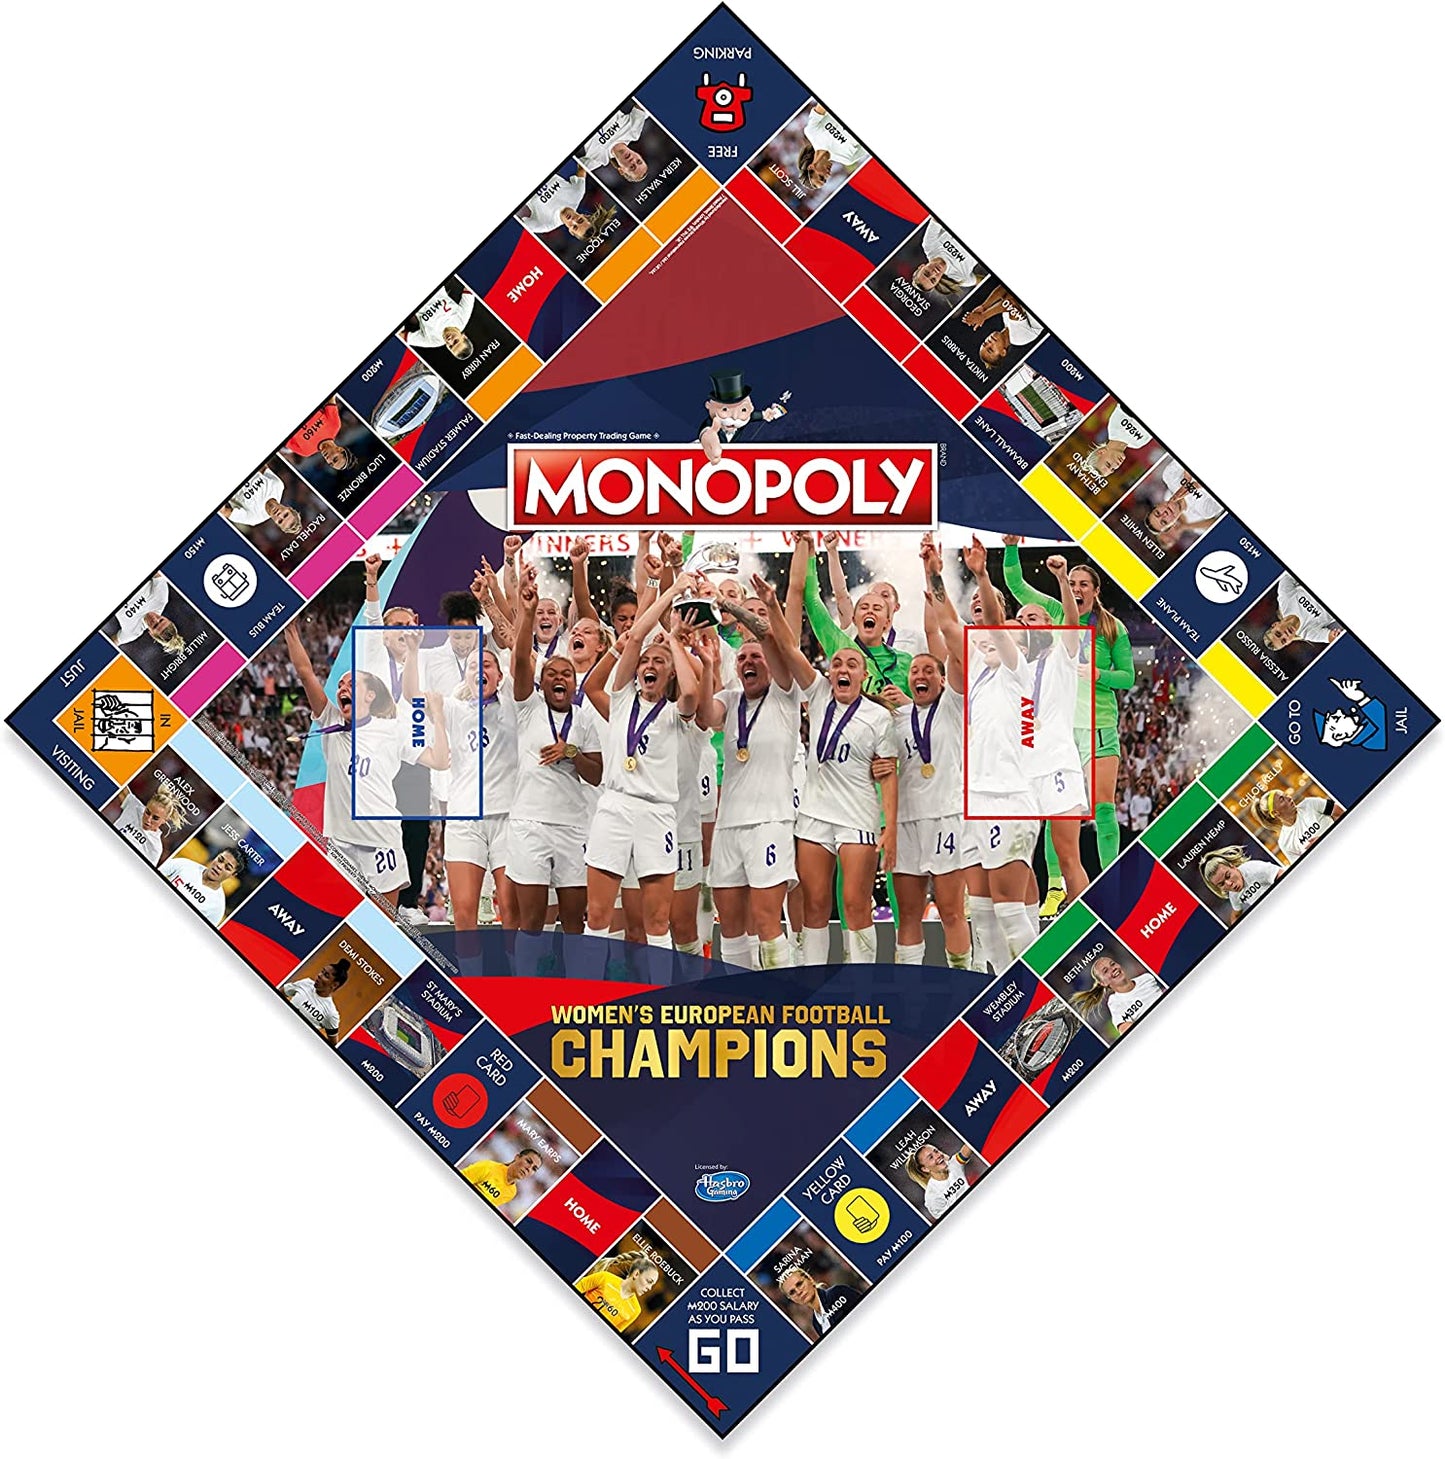 Winning Moves European Football Champions Monopoly Board Game English Edition, Embark on the road to Wembley acquiring Beth Mead and Lucy Bronze Roar